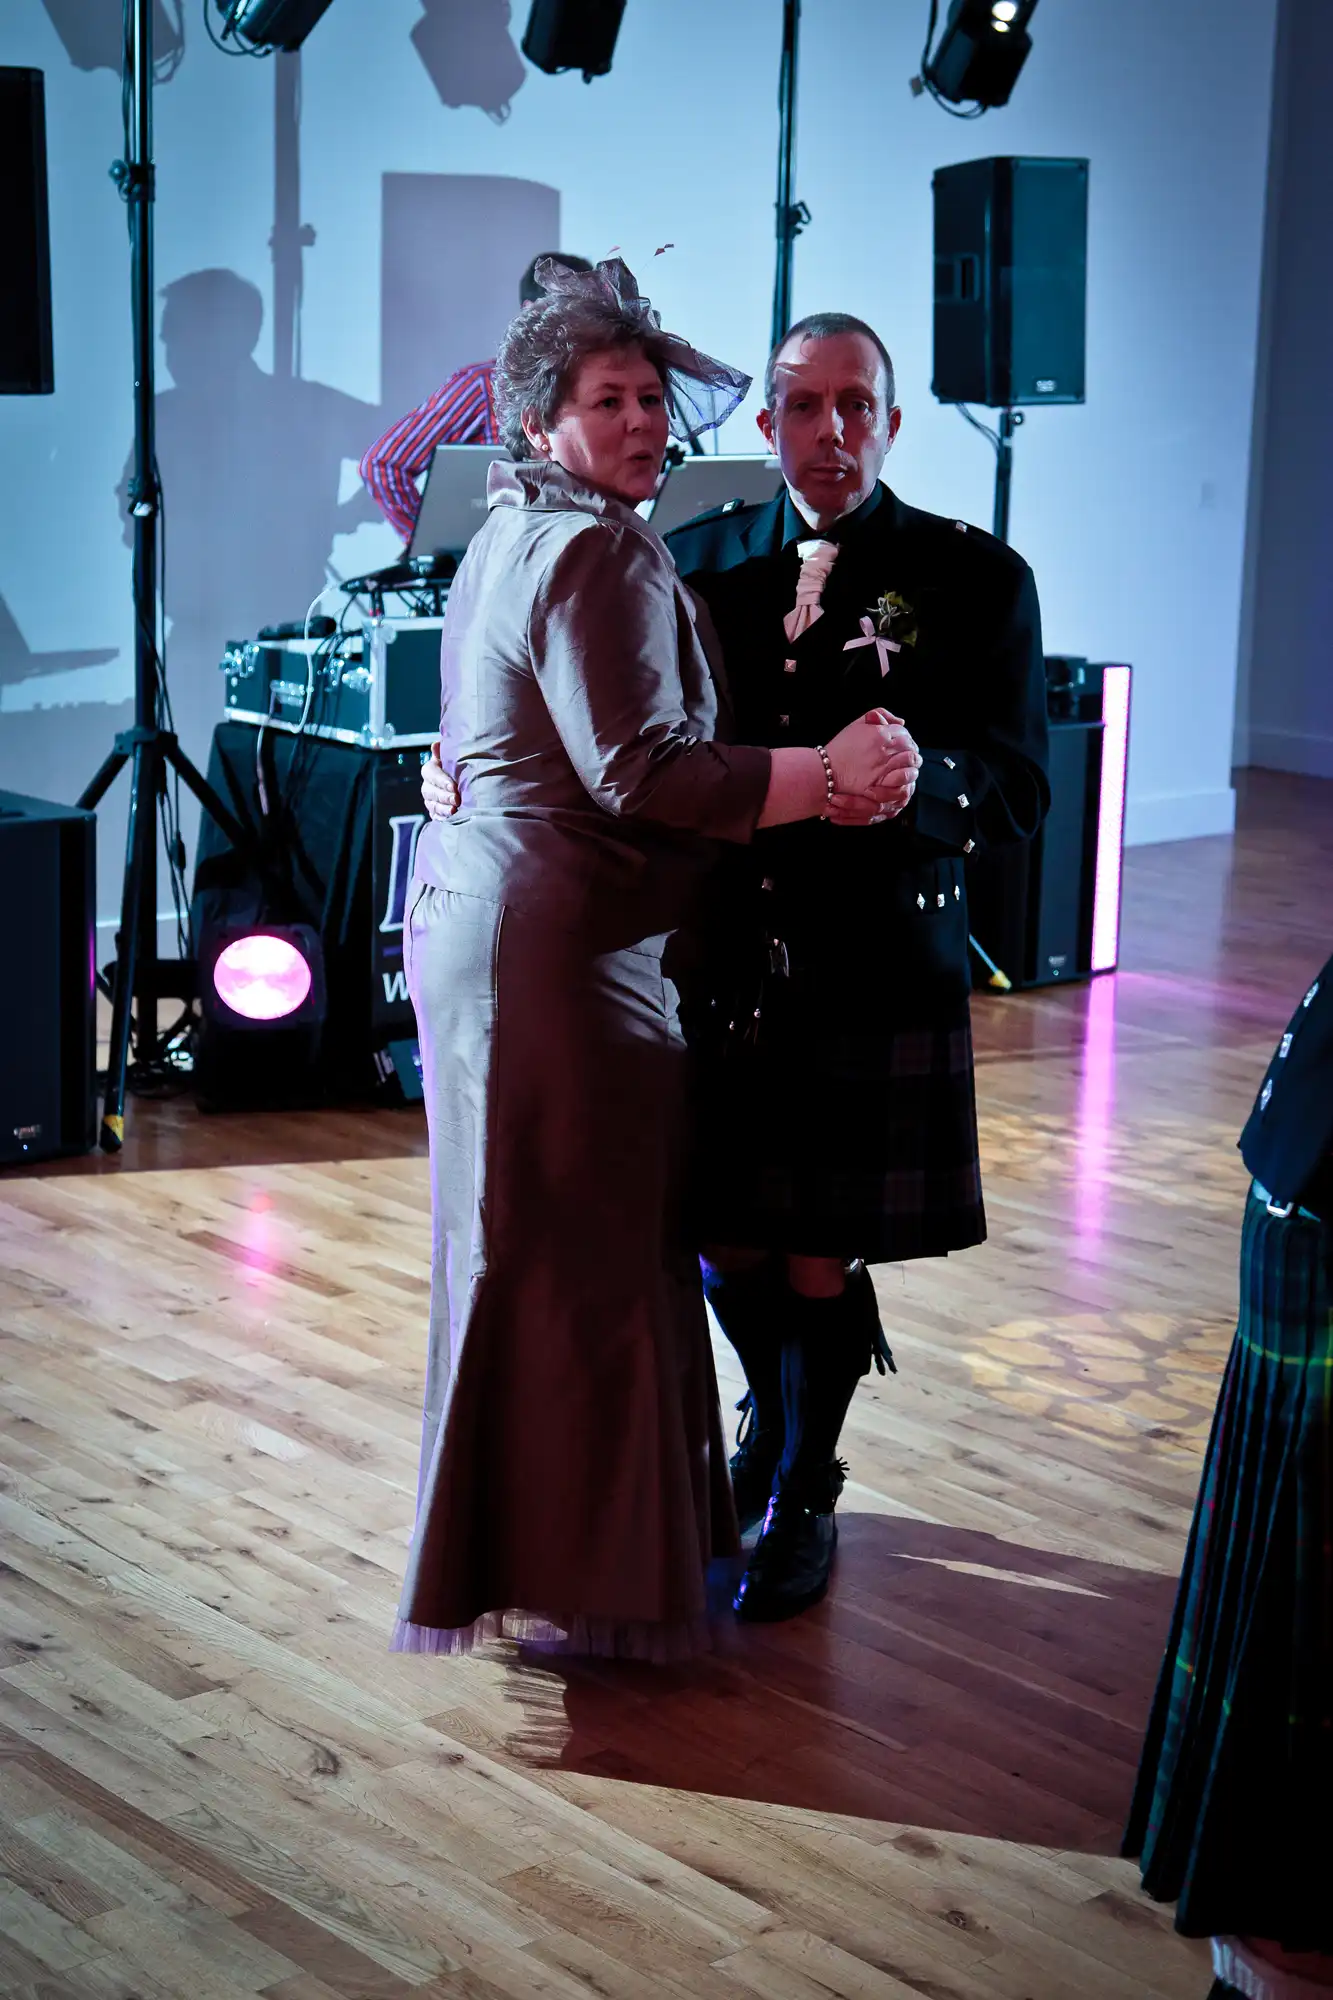 A woman in a formal dress dancing with a man wearing a kilt and formal attire at a wedding reception, with a band setup in the background.